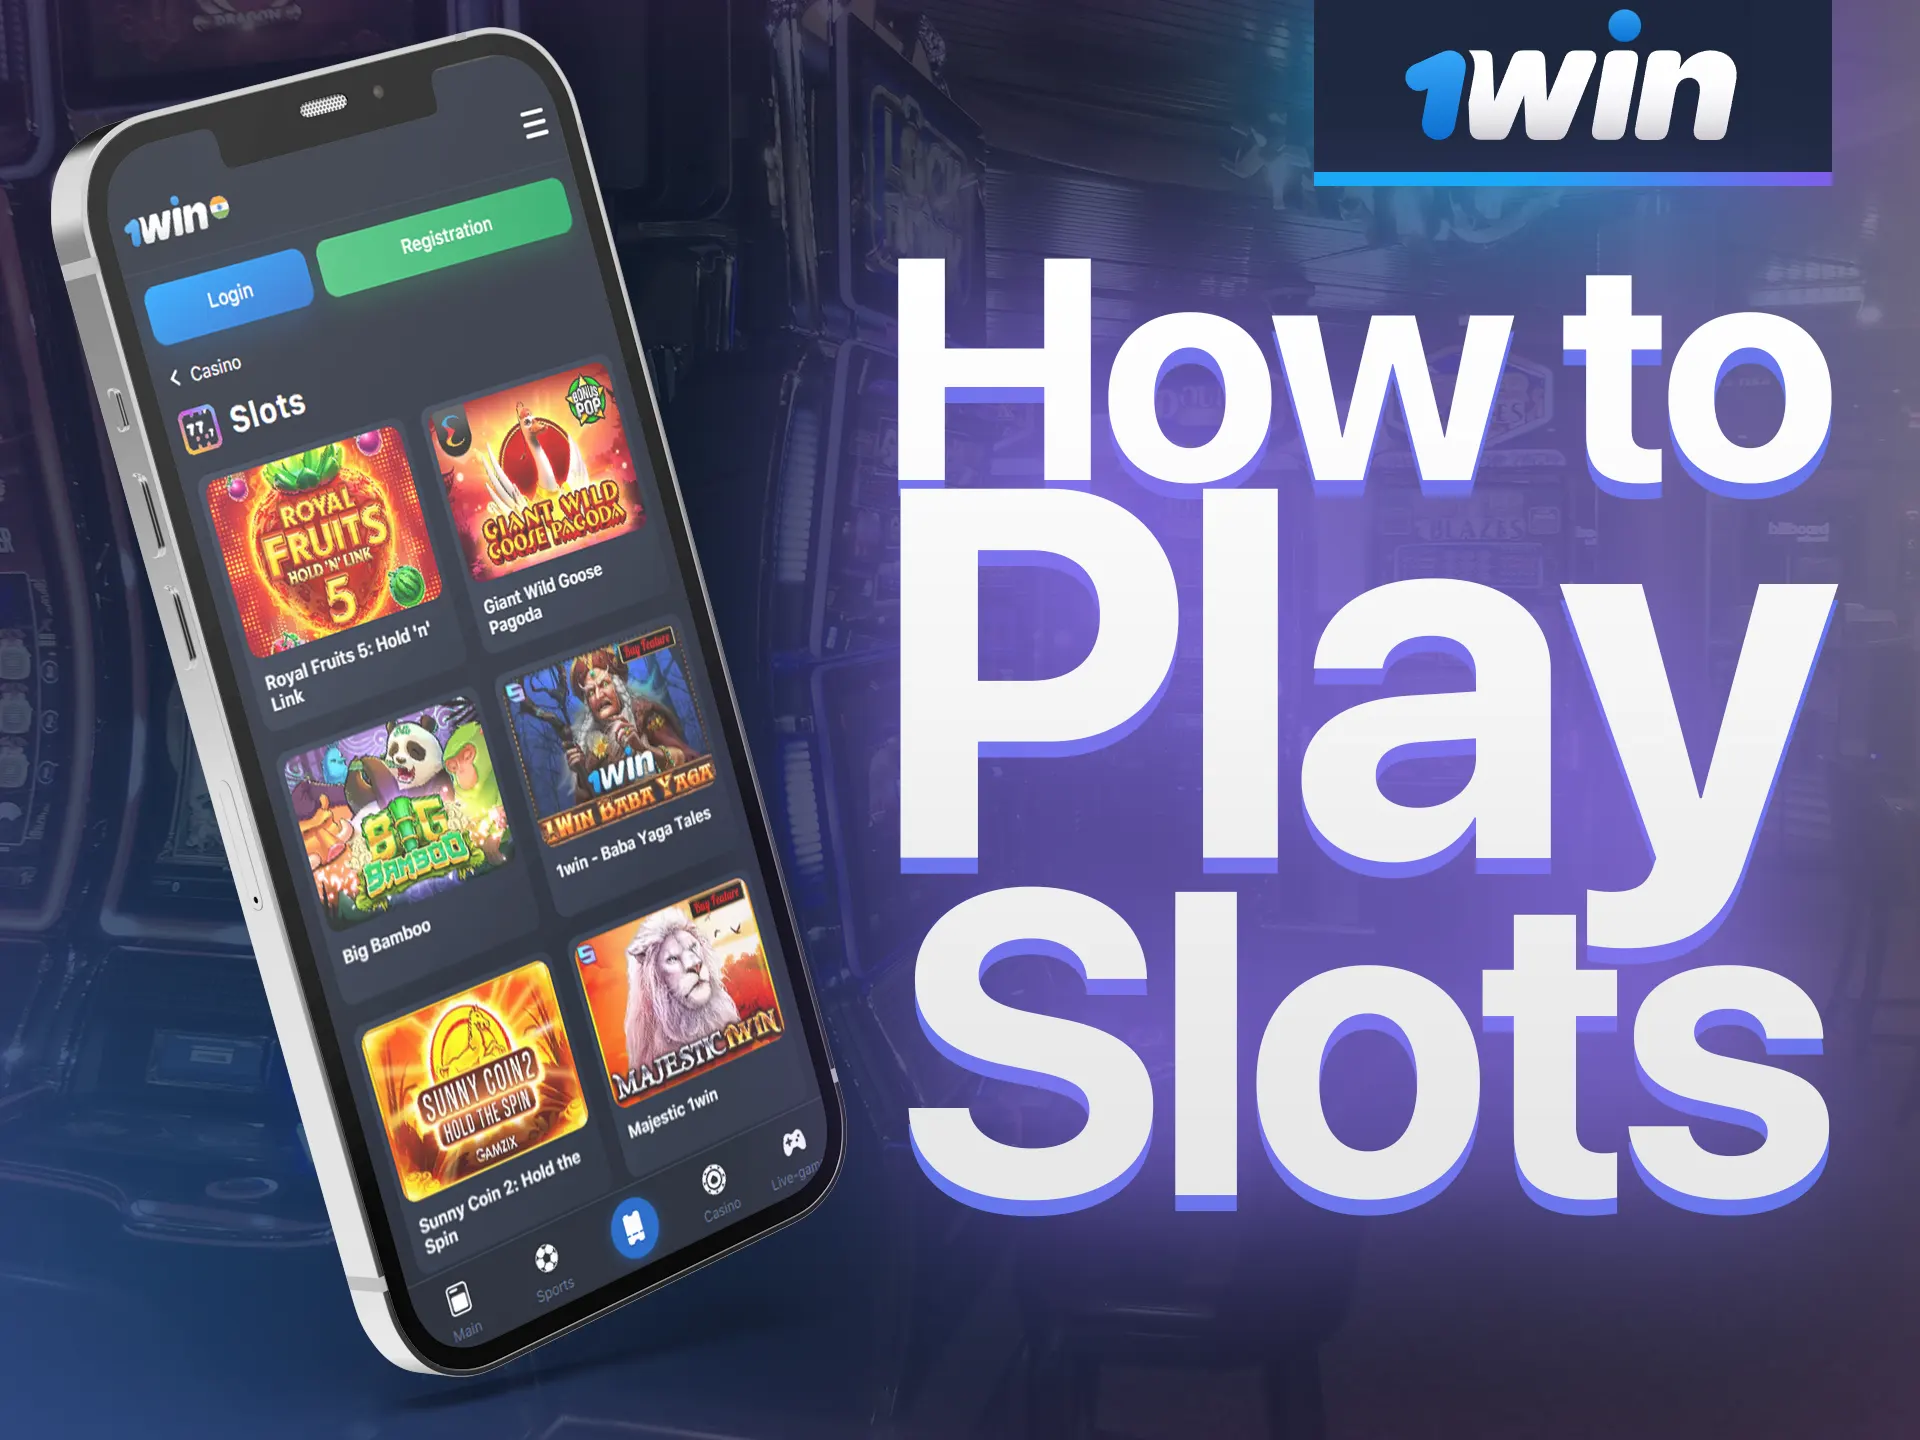 Playing slots with 1win is simple.